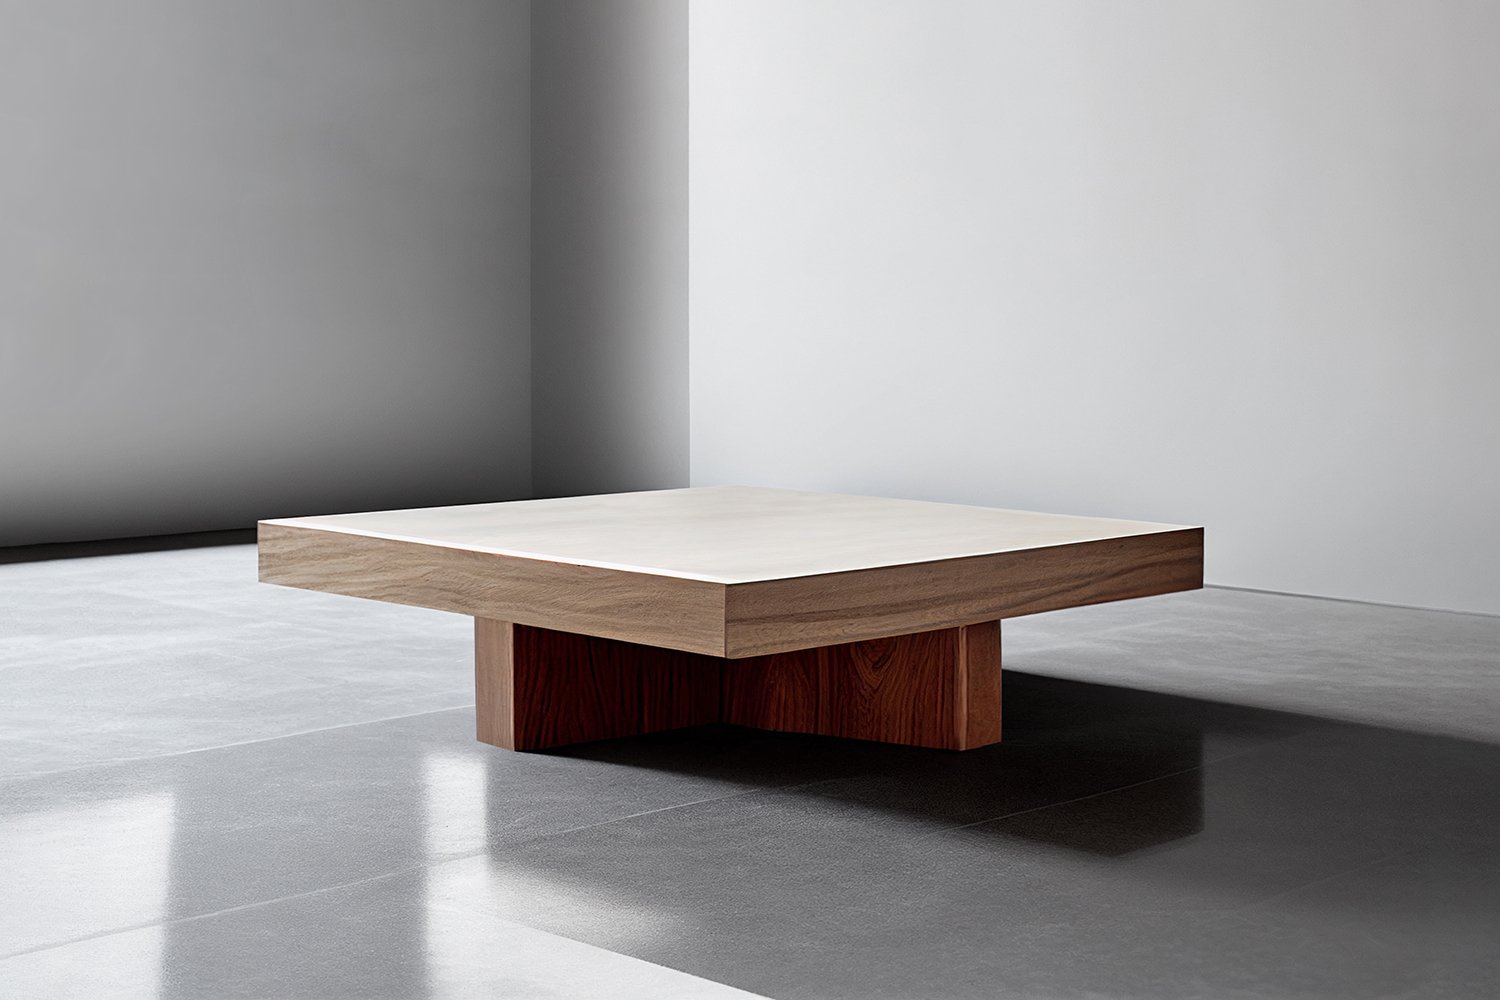 Square Coffee Table With Cruciform Base Made With Beautiful Veneer Wood by NONO Furniture — 4.jpg